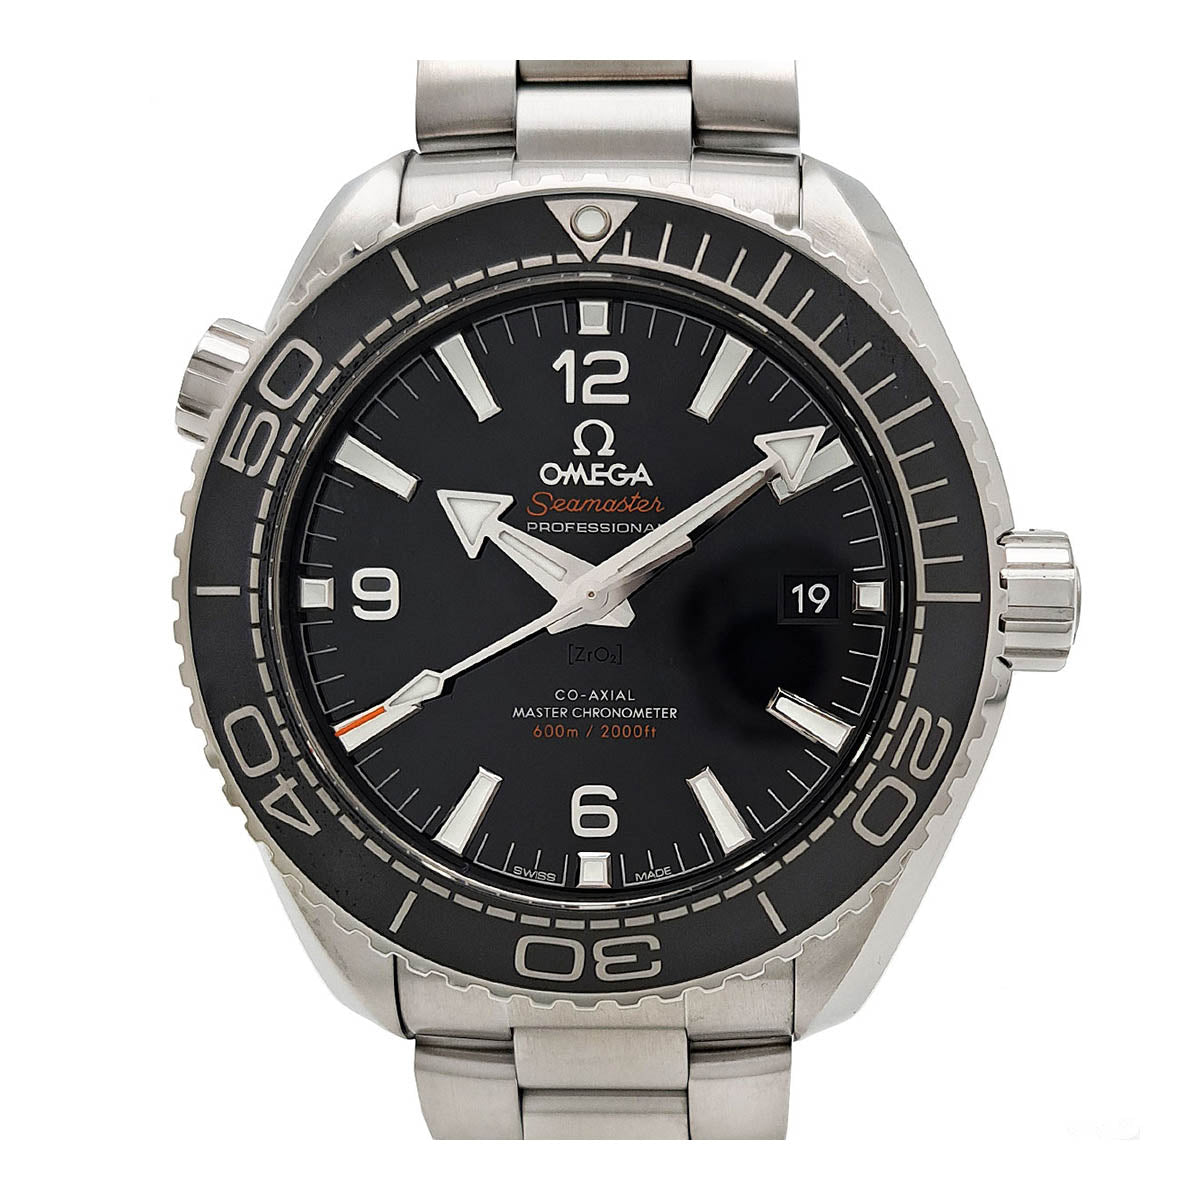 OMEGA Seamaster Planet Ocean 600M 215.30.44.21.01.001 Automatic Stainless Steel Men’s Pre-owned Watch 215.30.44.21.01.001